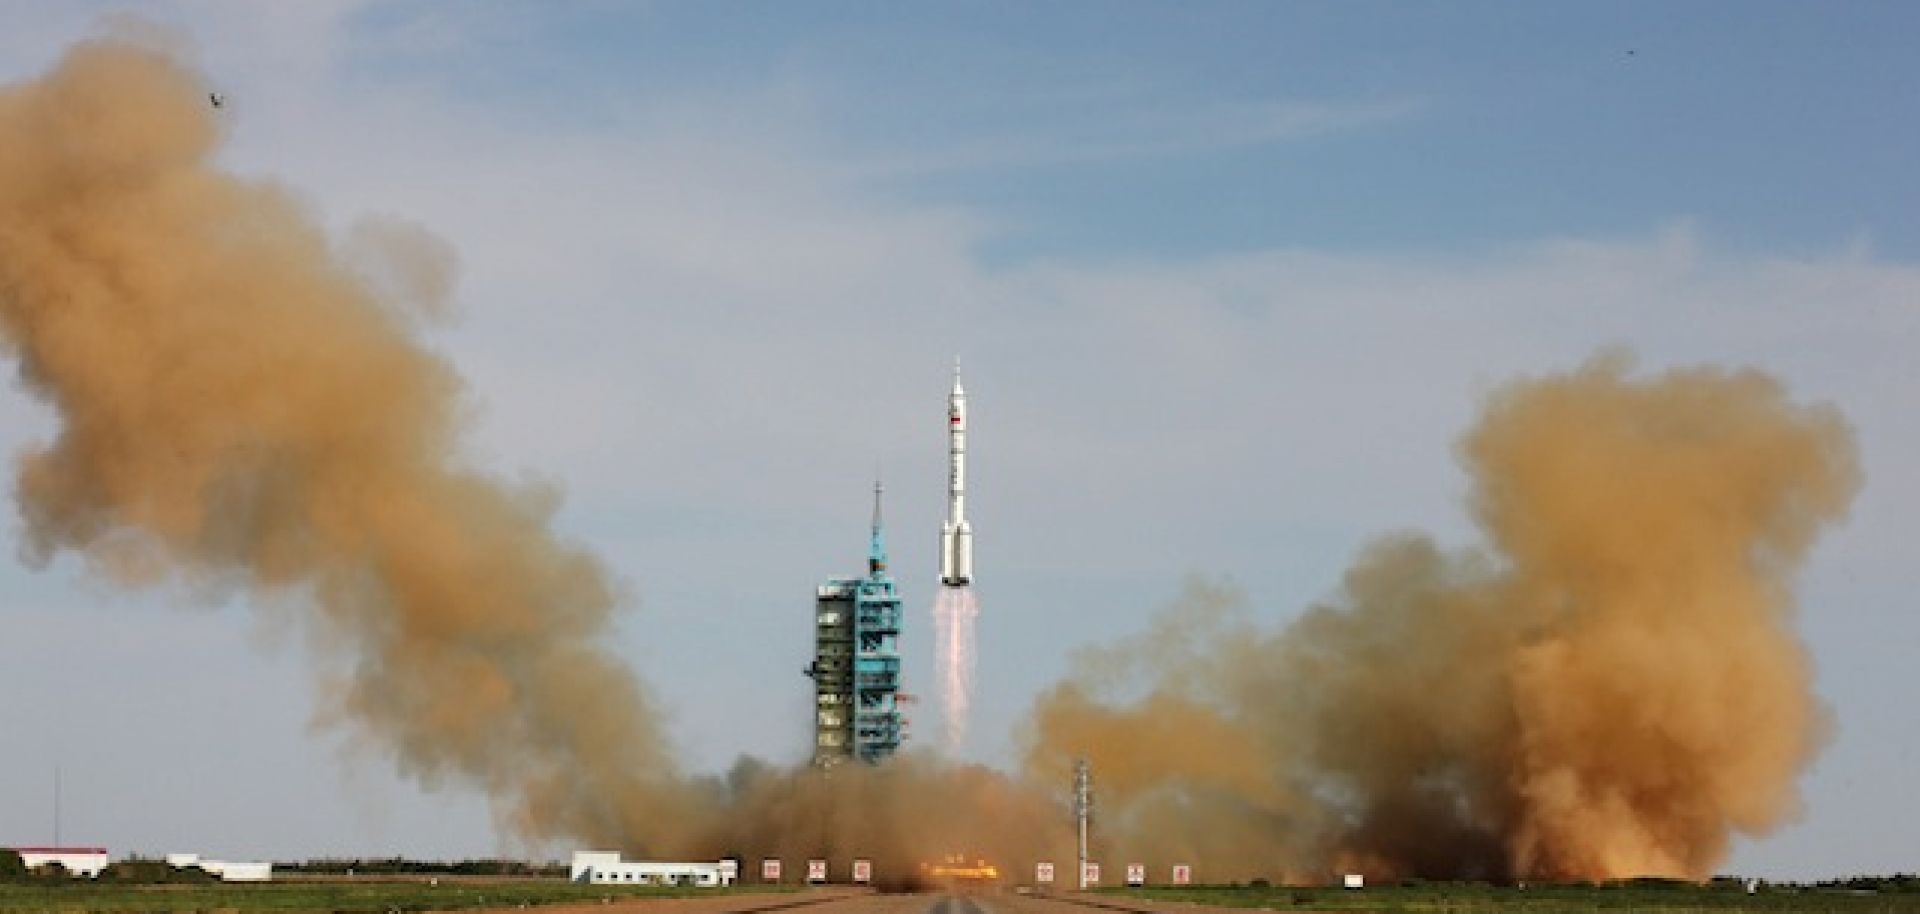 The rocket carrying the Shenzhou 10 spacecraft blasts off June 11.